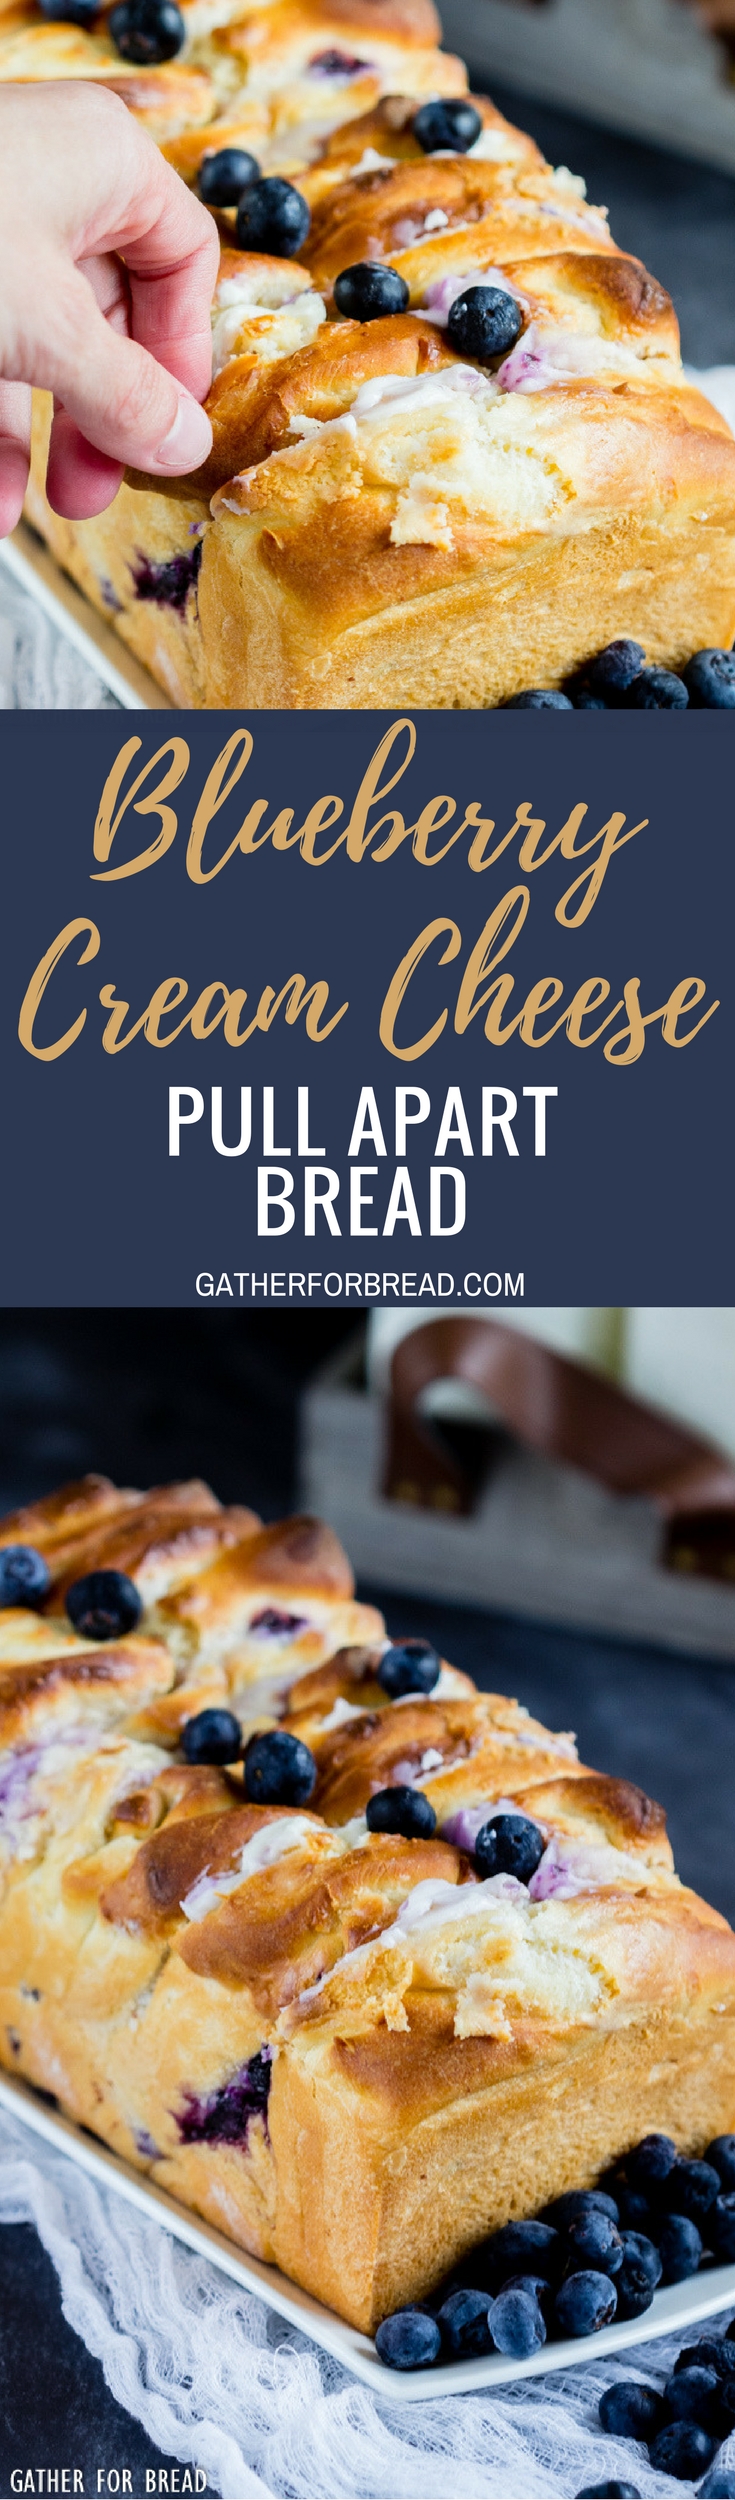 Blueberry Cream Cheese Pull Apart Bread - Delicious homemade pull apart bread is made with homemade dough, stuffed with cream cheese and studded with fresh blueberries. A summer favorite for berry lovers.